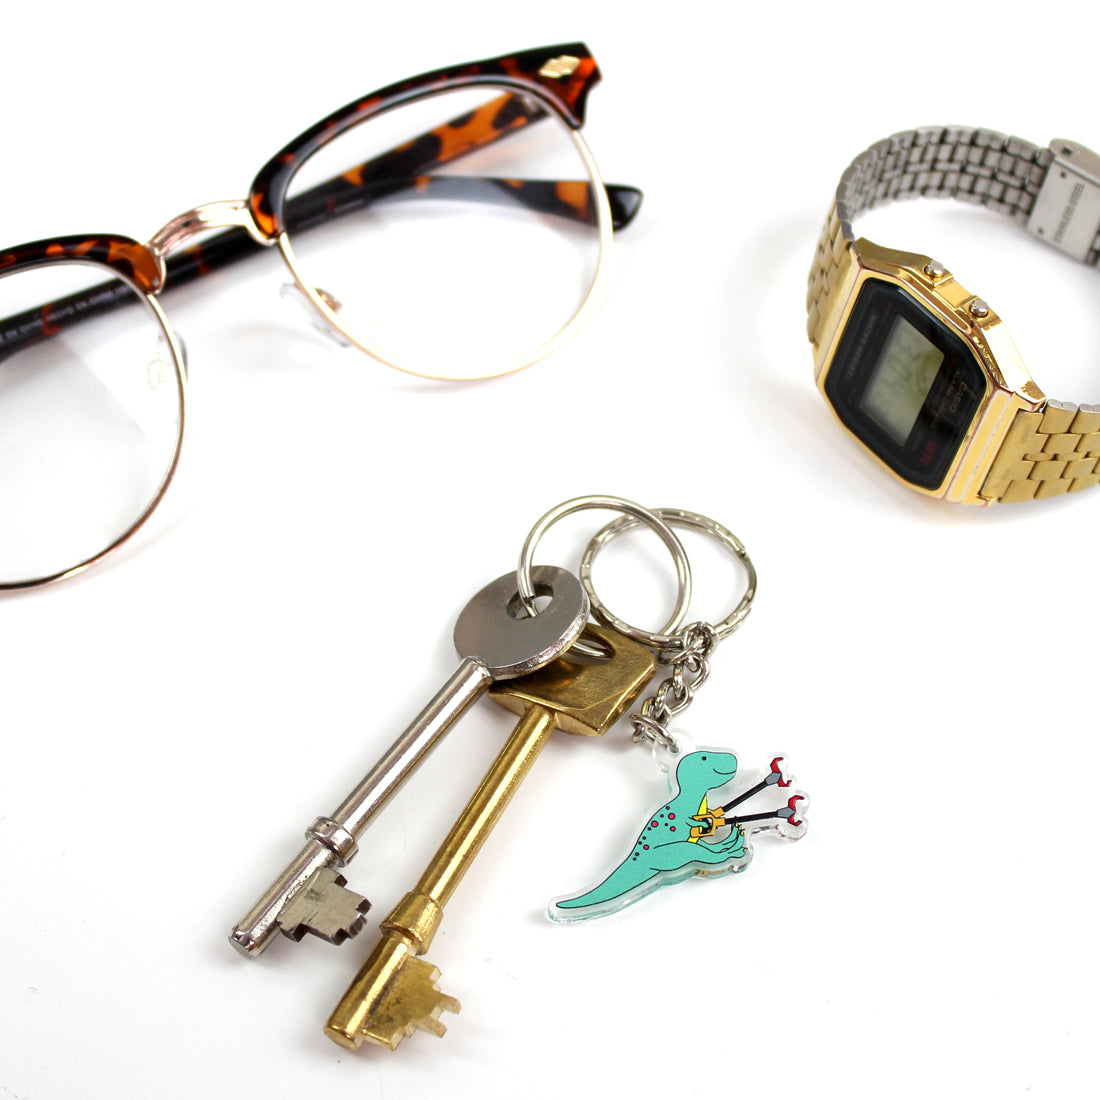 grabby arms t-rex dinosaur keyring on a split ring with keys and a watch and a pair of glasses